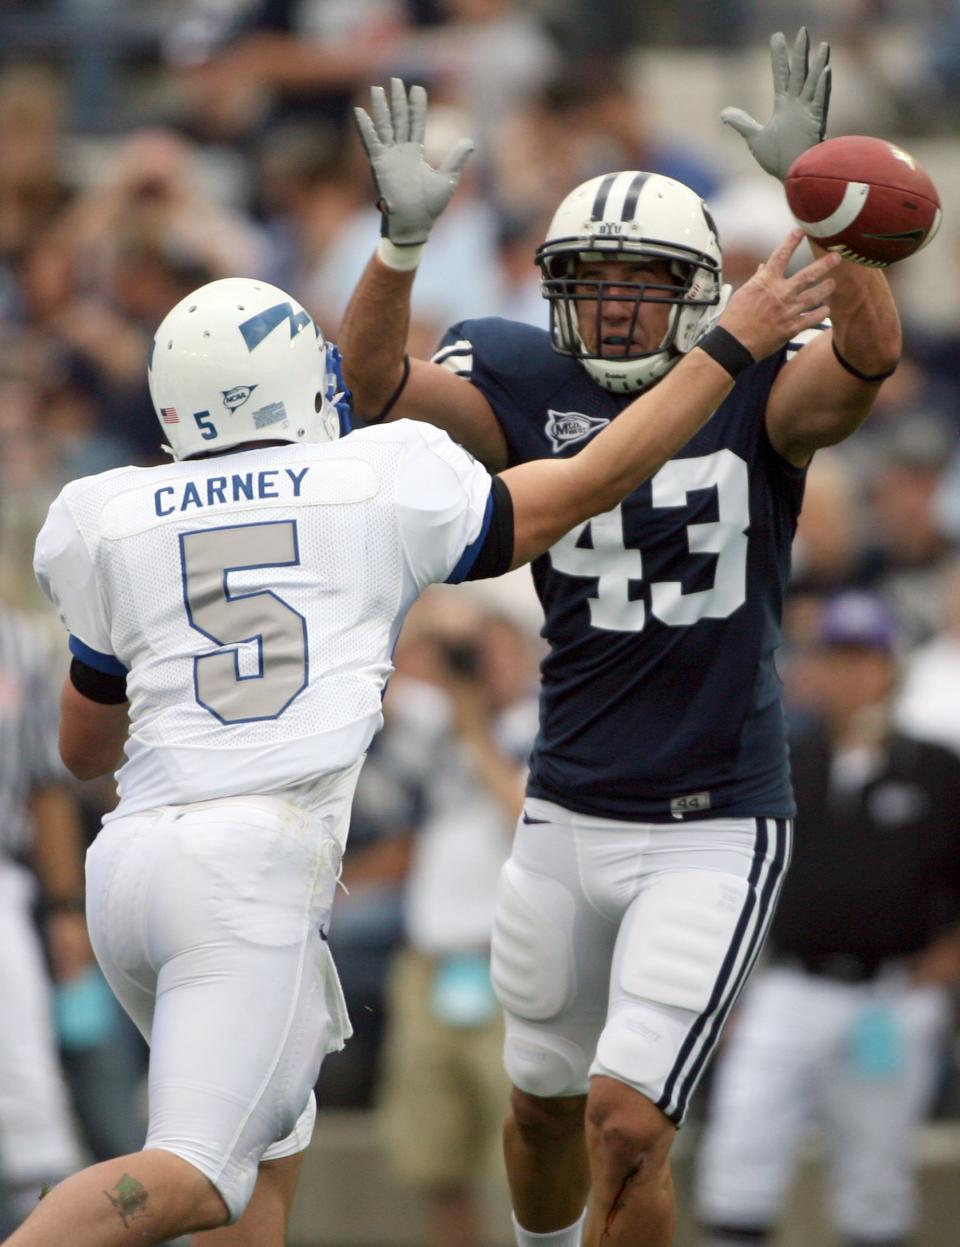 BYU’s David Nixon pressures Air Force QB Shaun Carney at LaVell Edwards Stadium in Provo on Saturday, Sept. 22, 2007. Nixon is an uncle to current Cougars John Henry Daley and Michael Daley. | Jason Olson, Deseret News